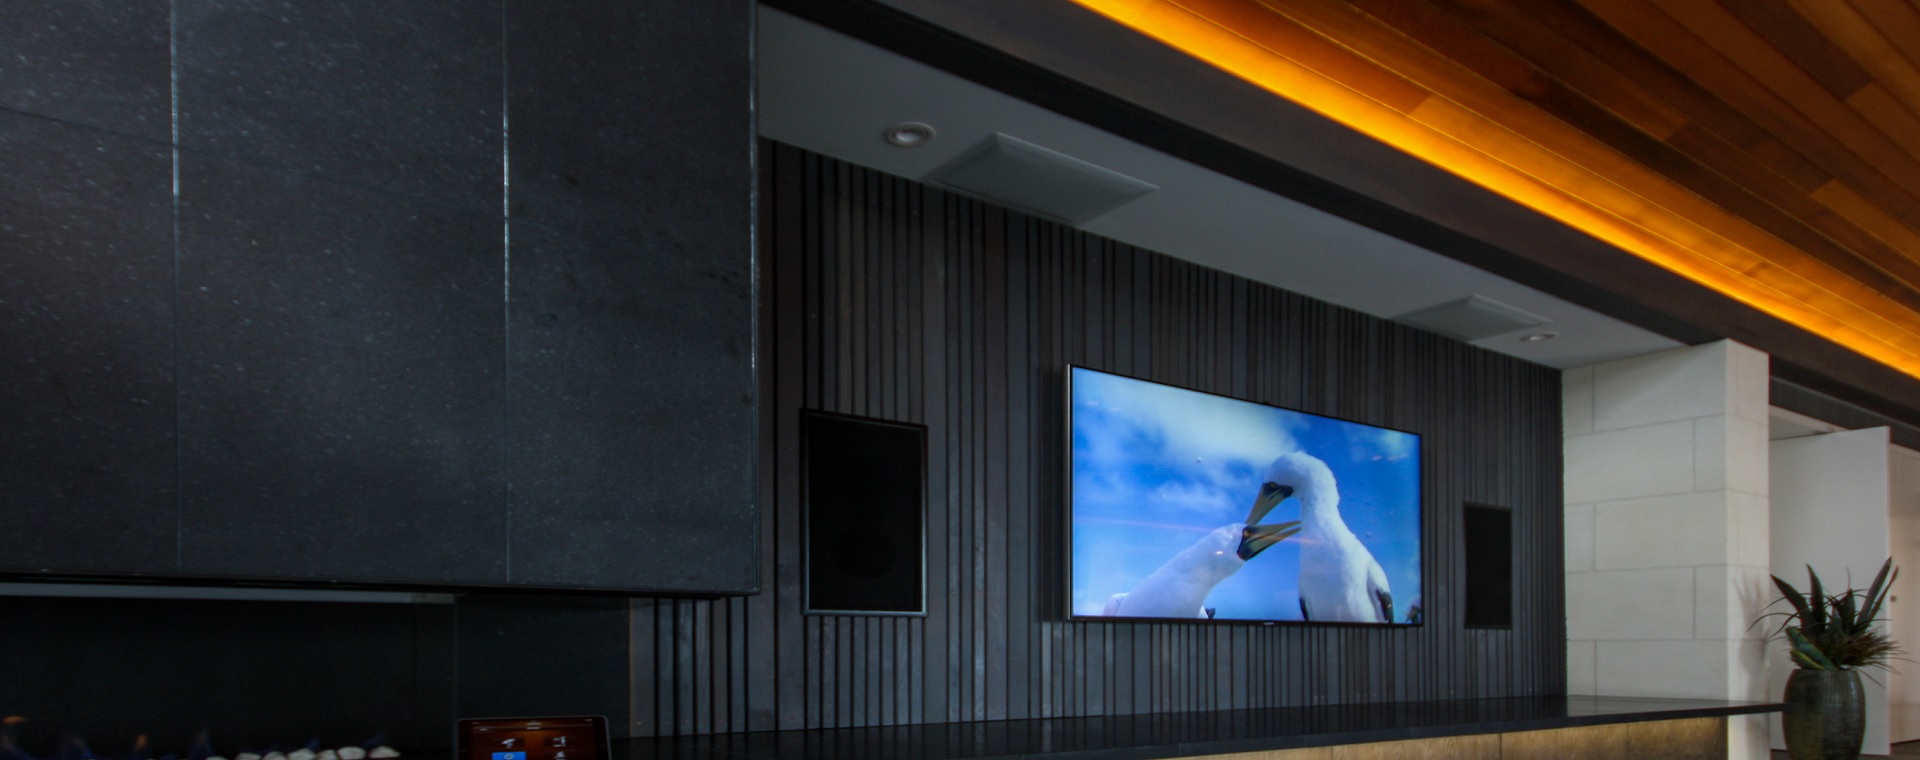 Home theatre with in-wall speakers and LED lighting, controlled by home auotmation